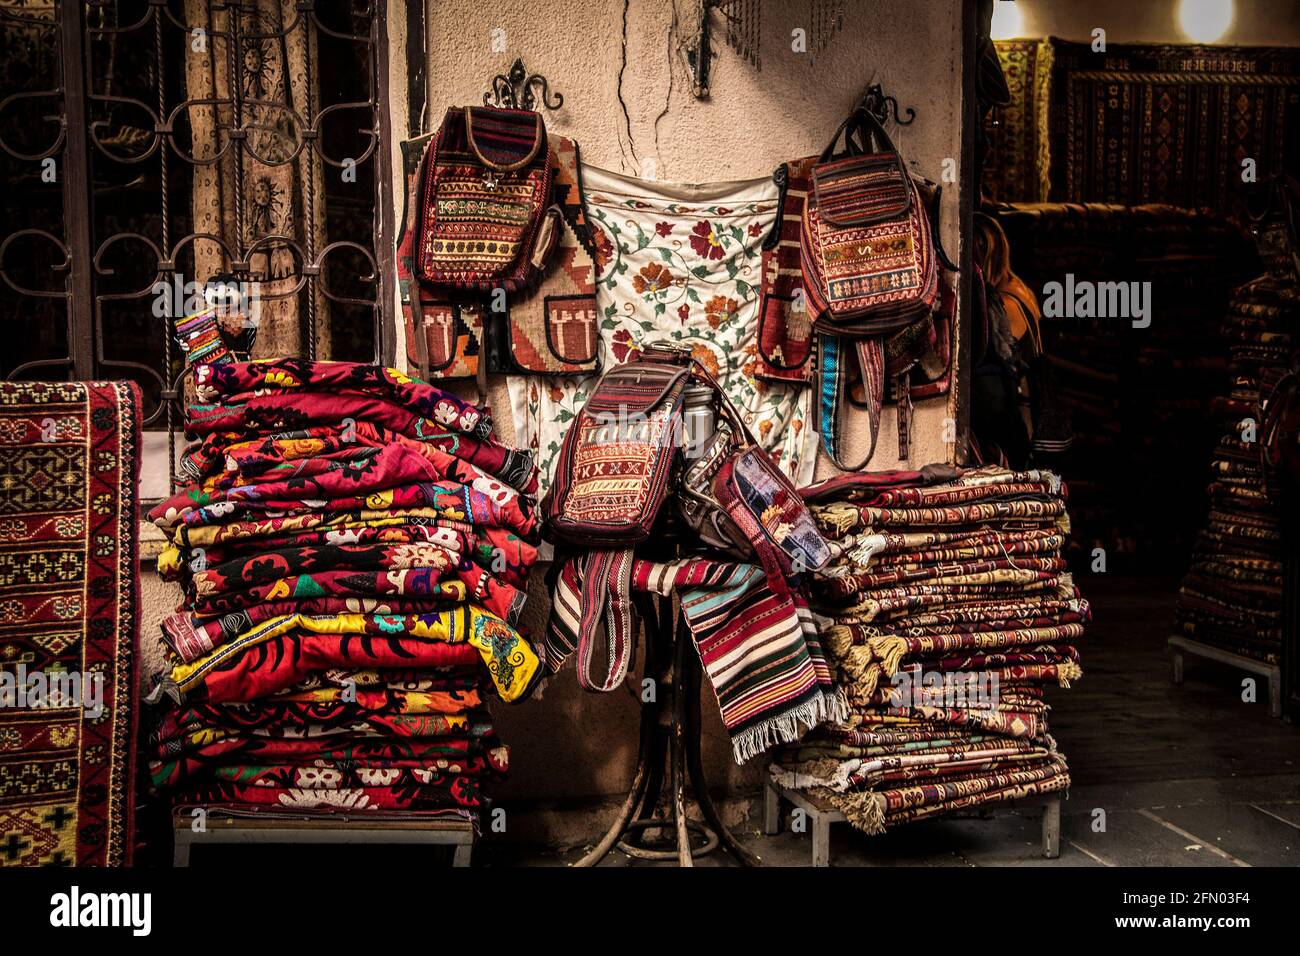 A pile of Embroidery Suzani Textile tapestries and backpacks and rugs outside a store in Tbilisi Stock Photo